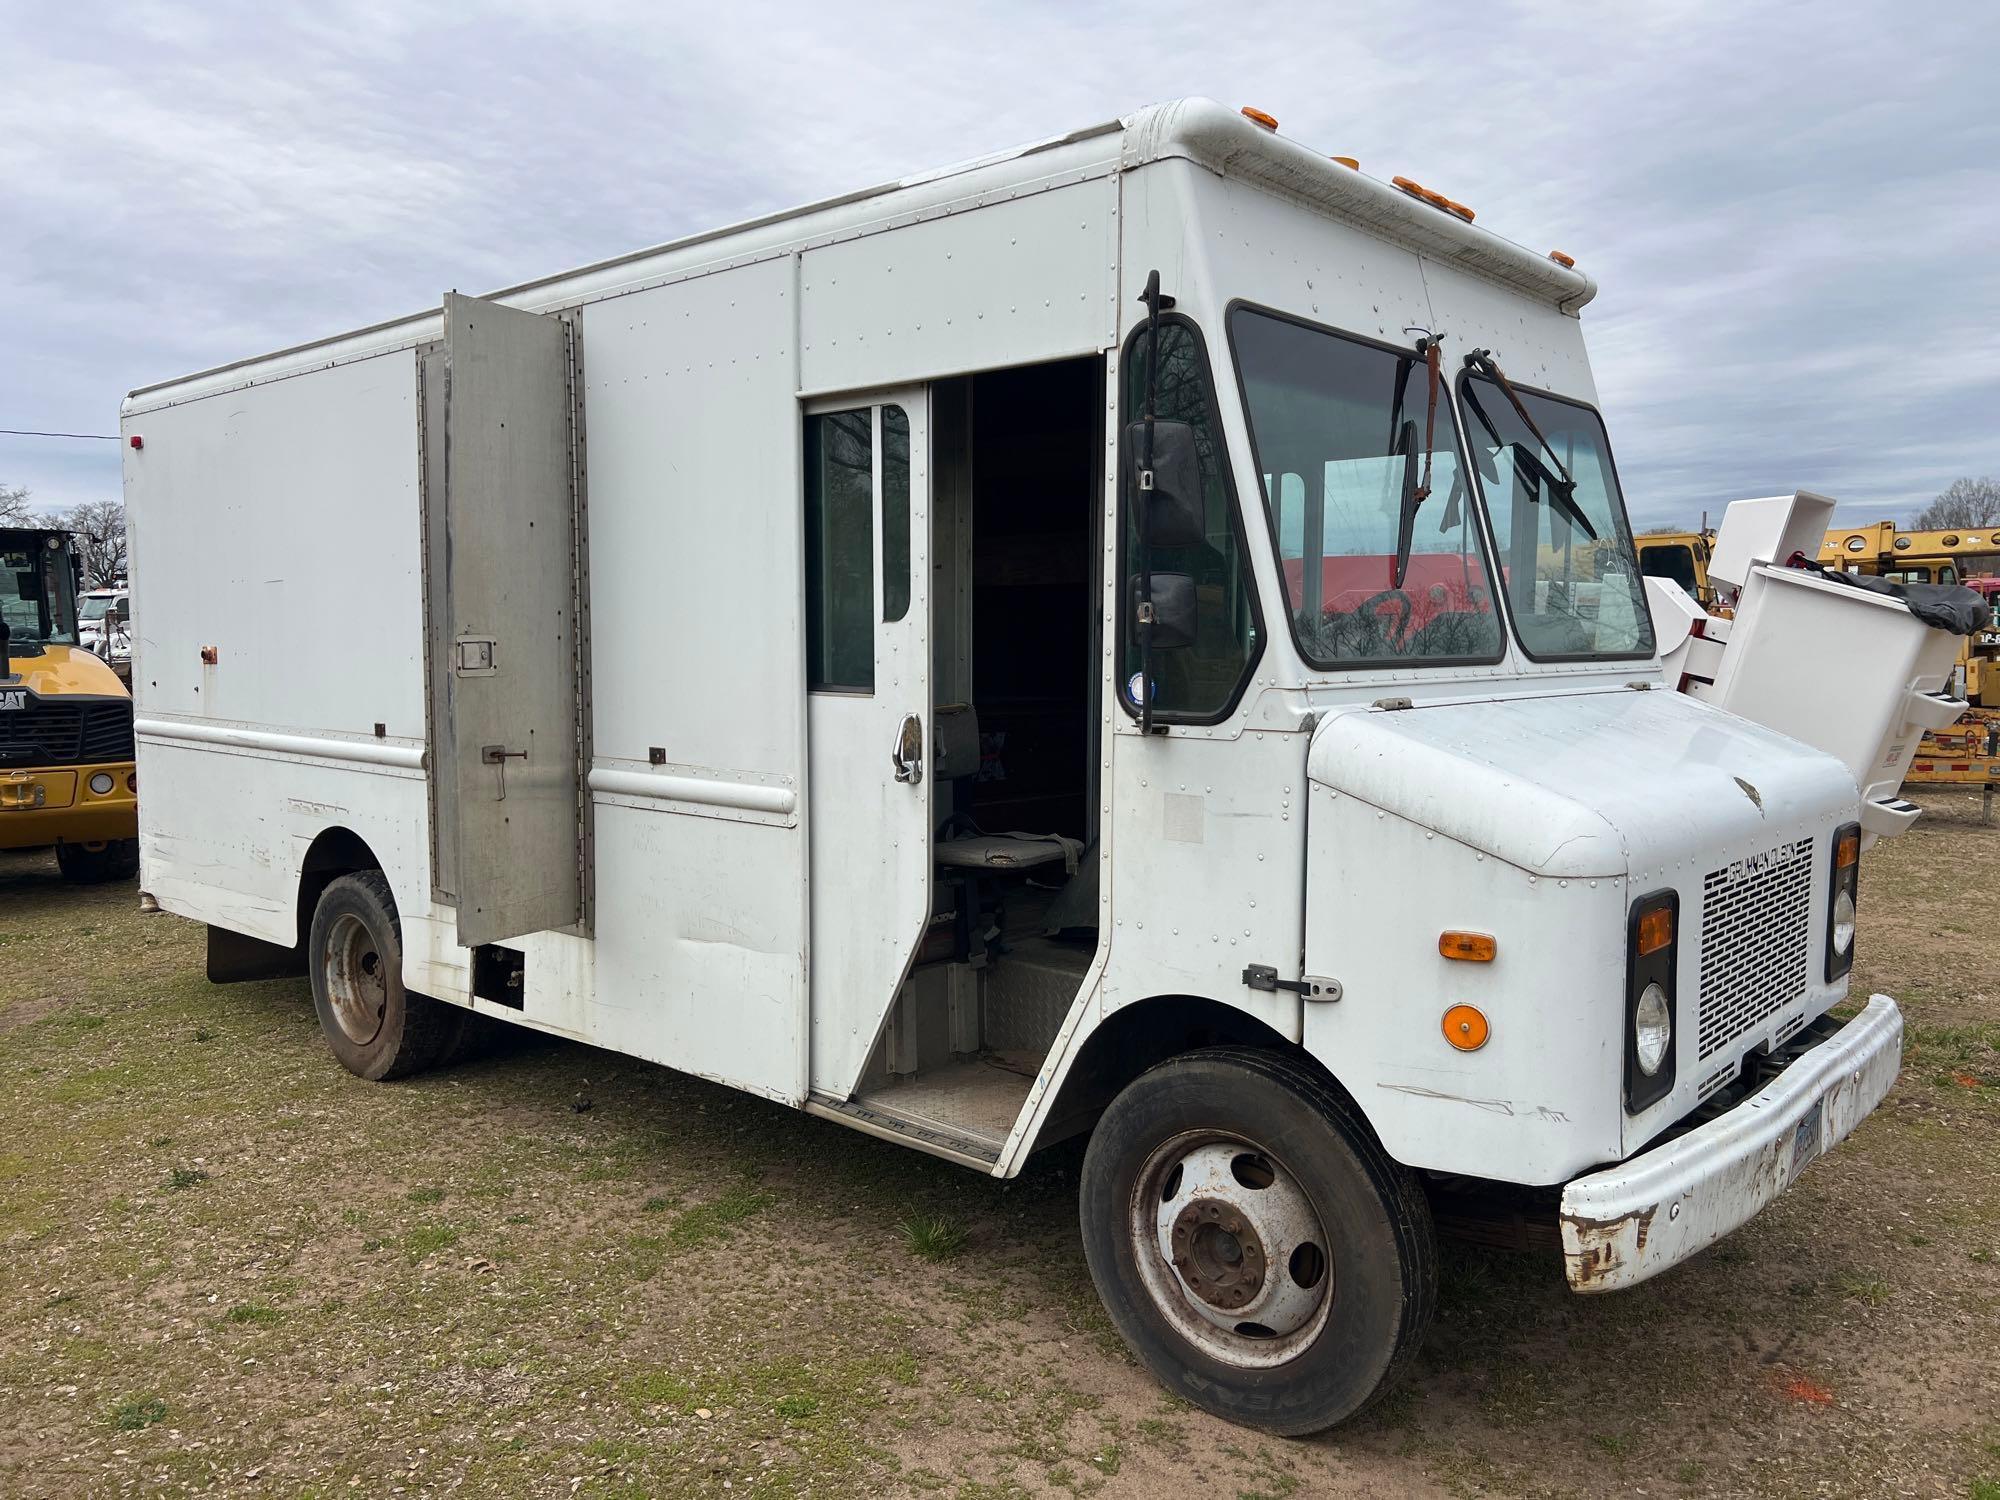 GRUMMAN OLSON VAN TRUCK VN:N/A powered by 6.5 diesel engine, equipped with automatic transmission,